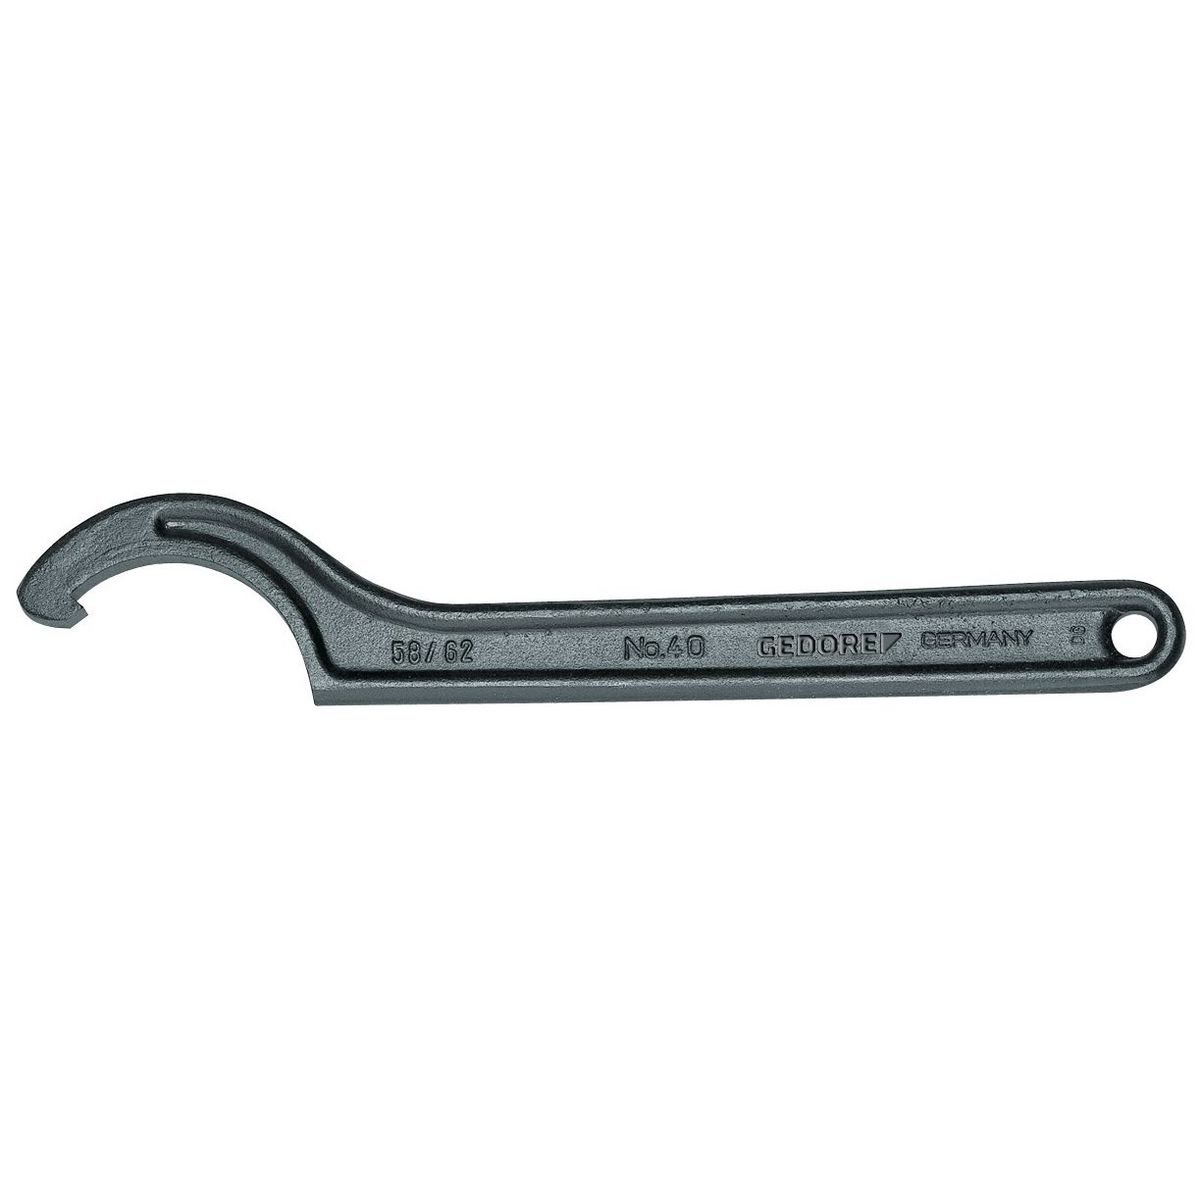 Hook wrench with lug, 95-100mm No.40 95-100 Gedore